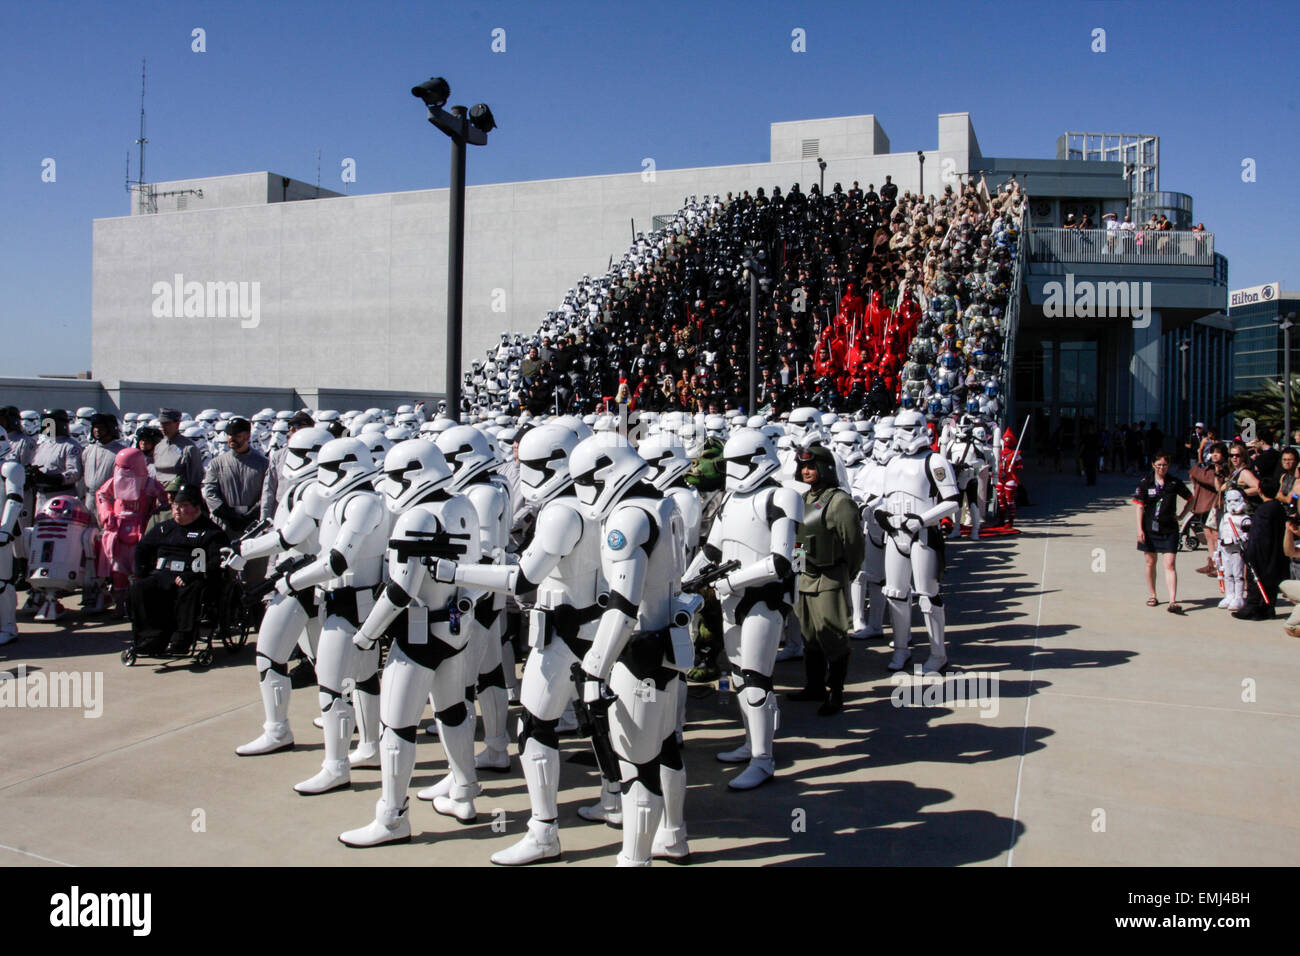 Anaheim, CA, USA - April 18, 2015: A Group of Storm Troopers posing for pictures at the 2015 Star Wars celebration in the sun. Stock Photo